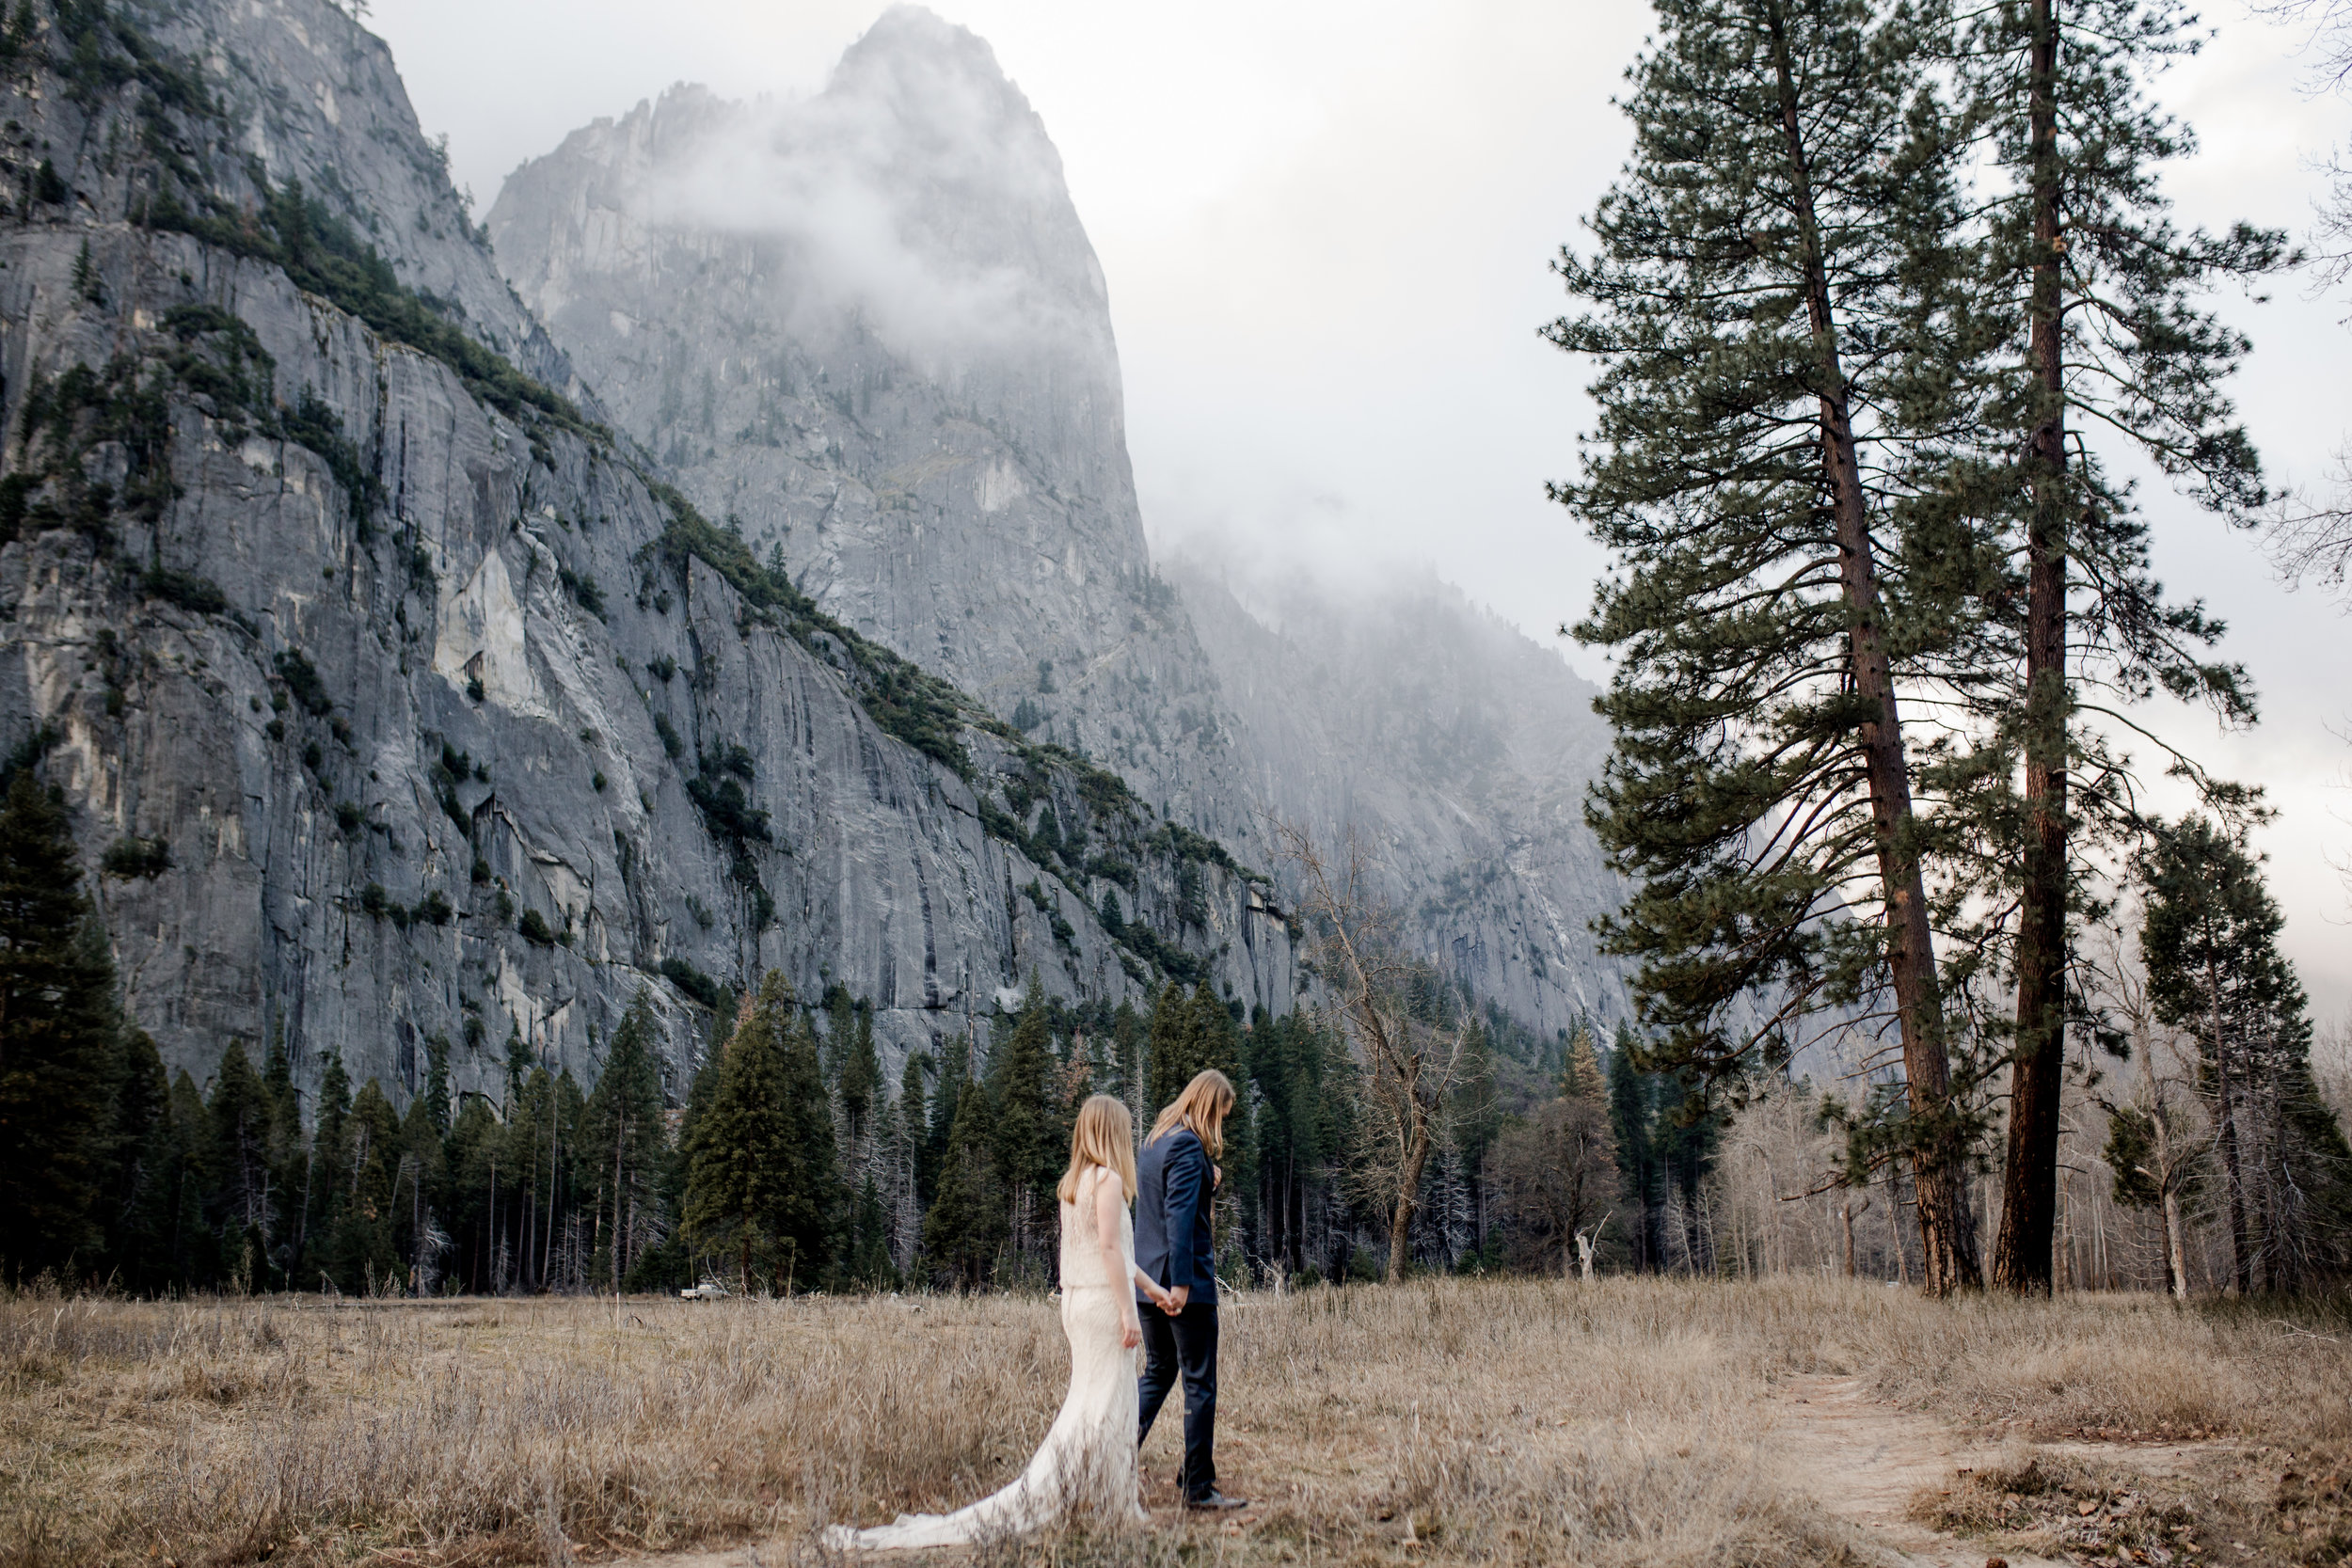 nicole-daacke-photography-yousemite-national-park-elopement-photographer-winter-cloud-moody-elope-inspiration-yosemite-valley-tunnel-view-winter-cloud-fog-weather-wedding-photos-70.jpg